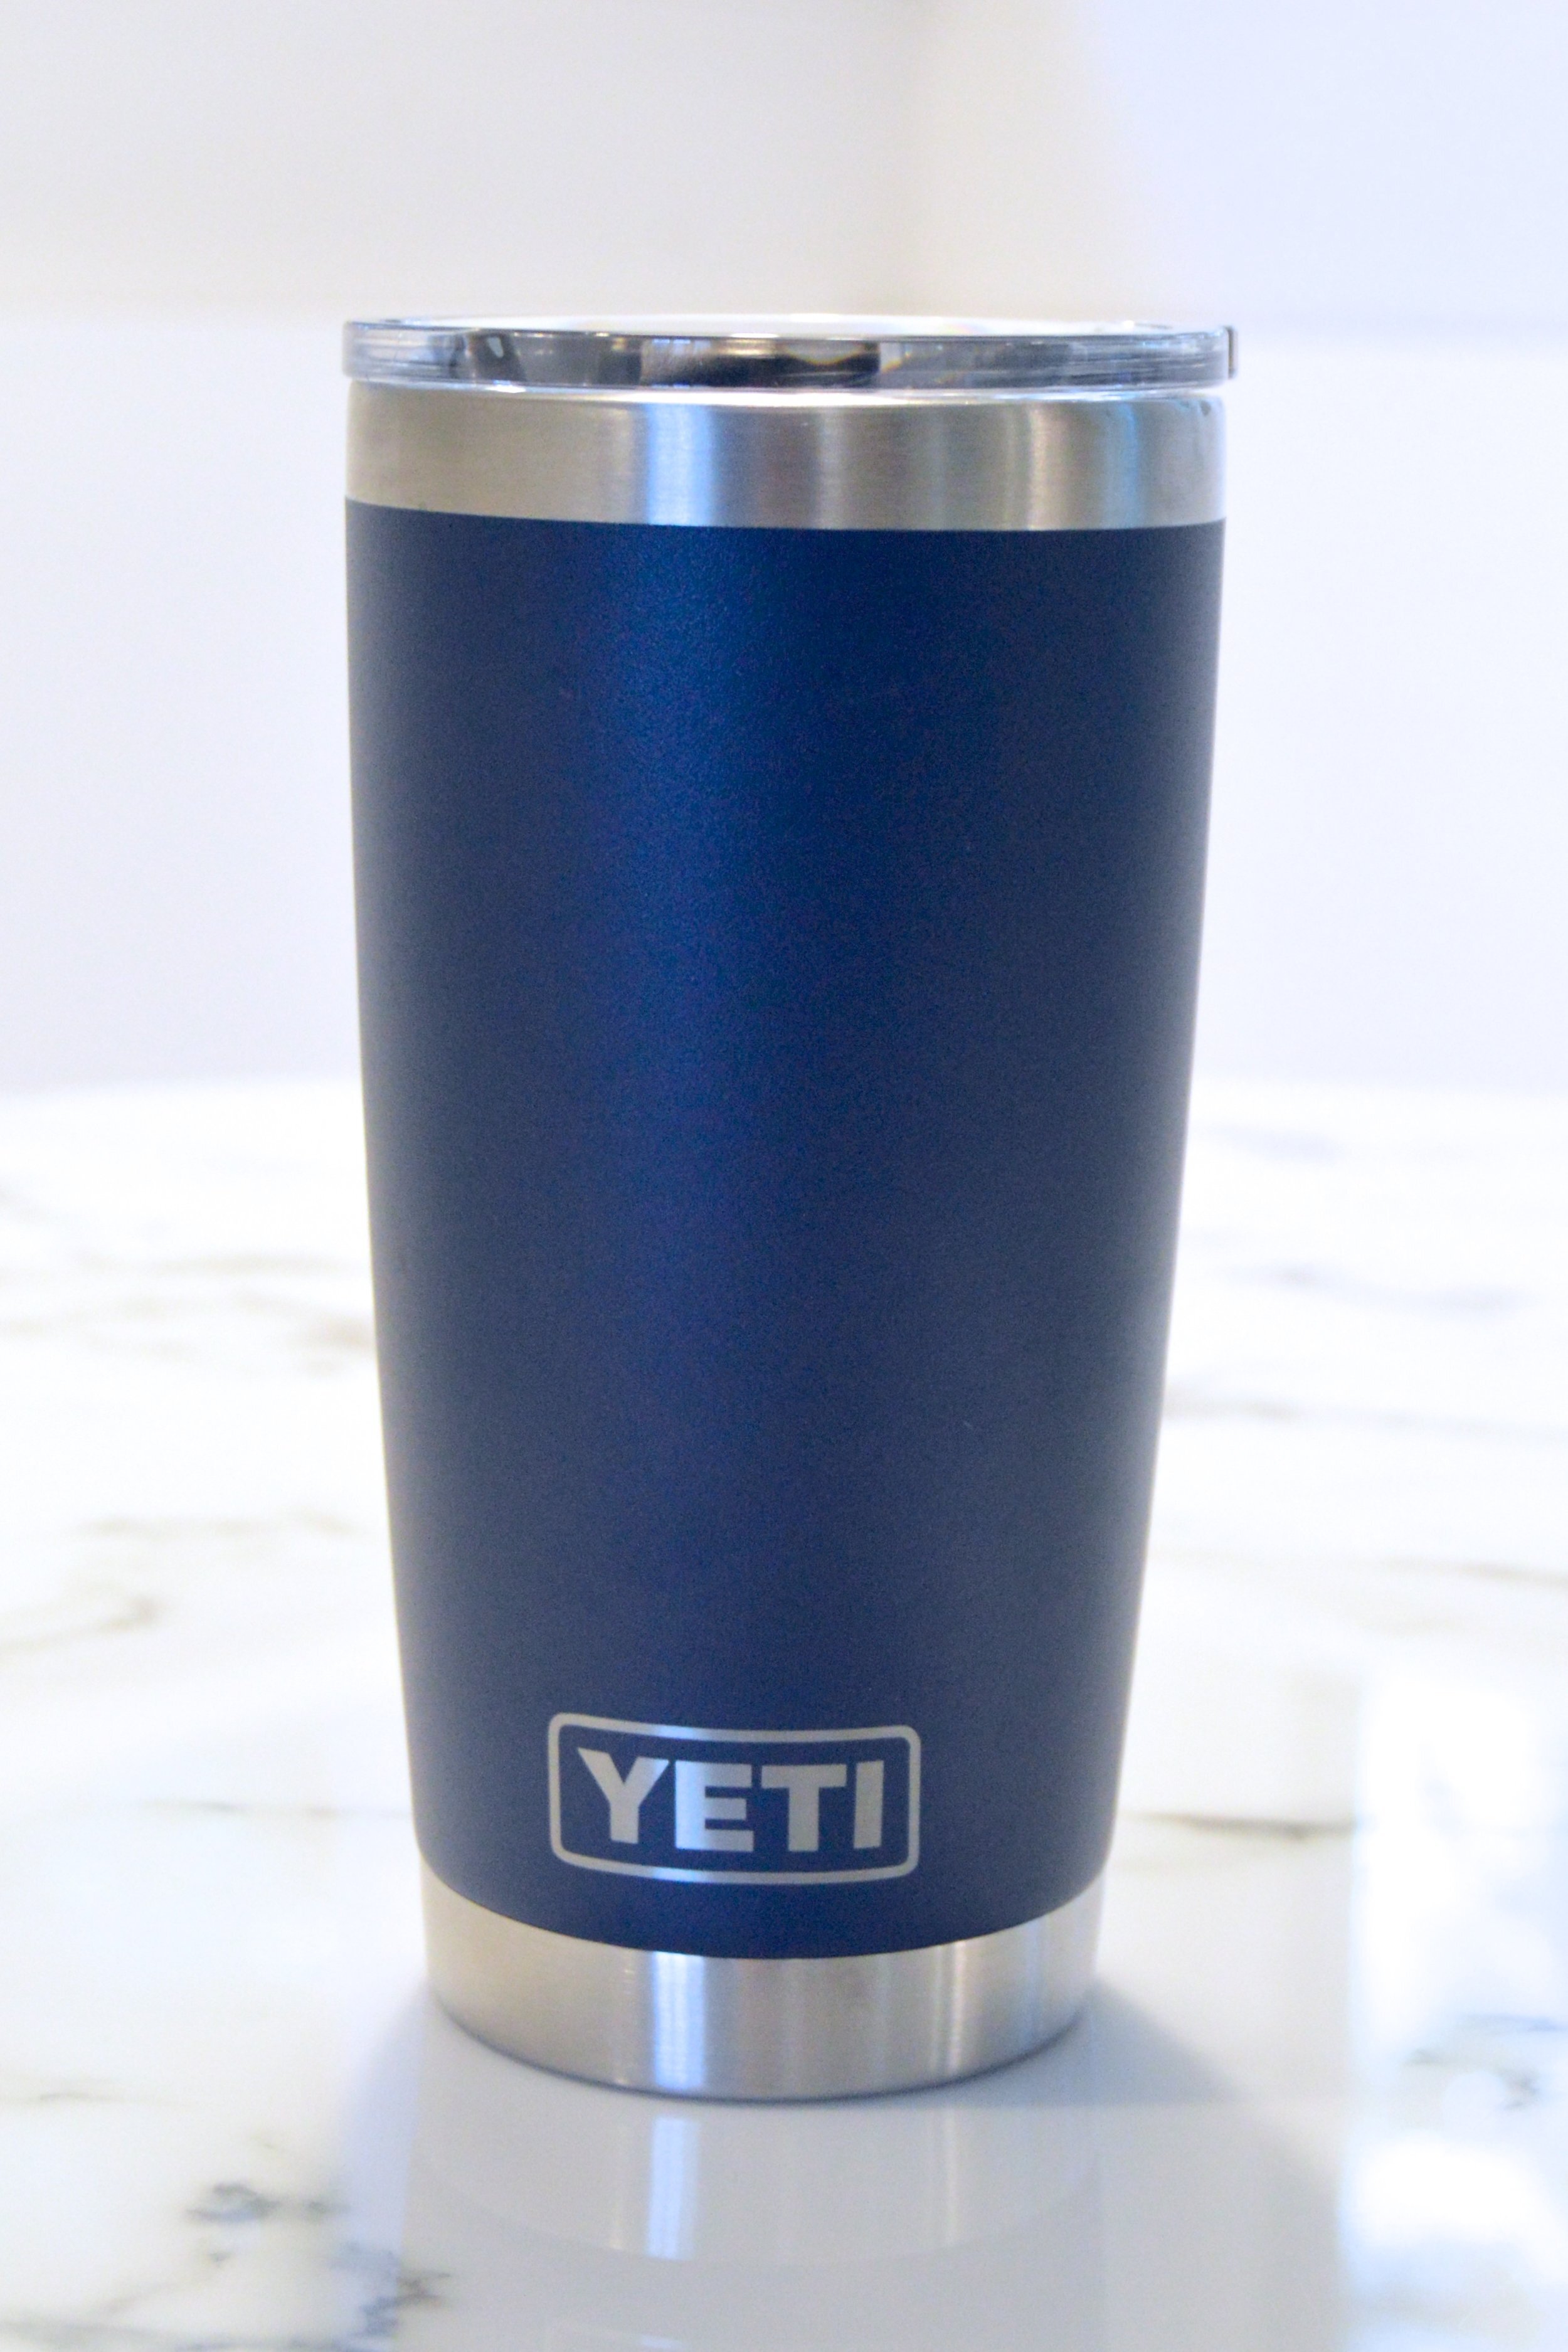 Why is YETI Tumbler So Expensive?